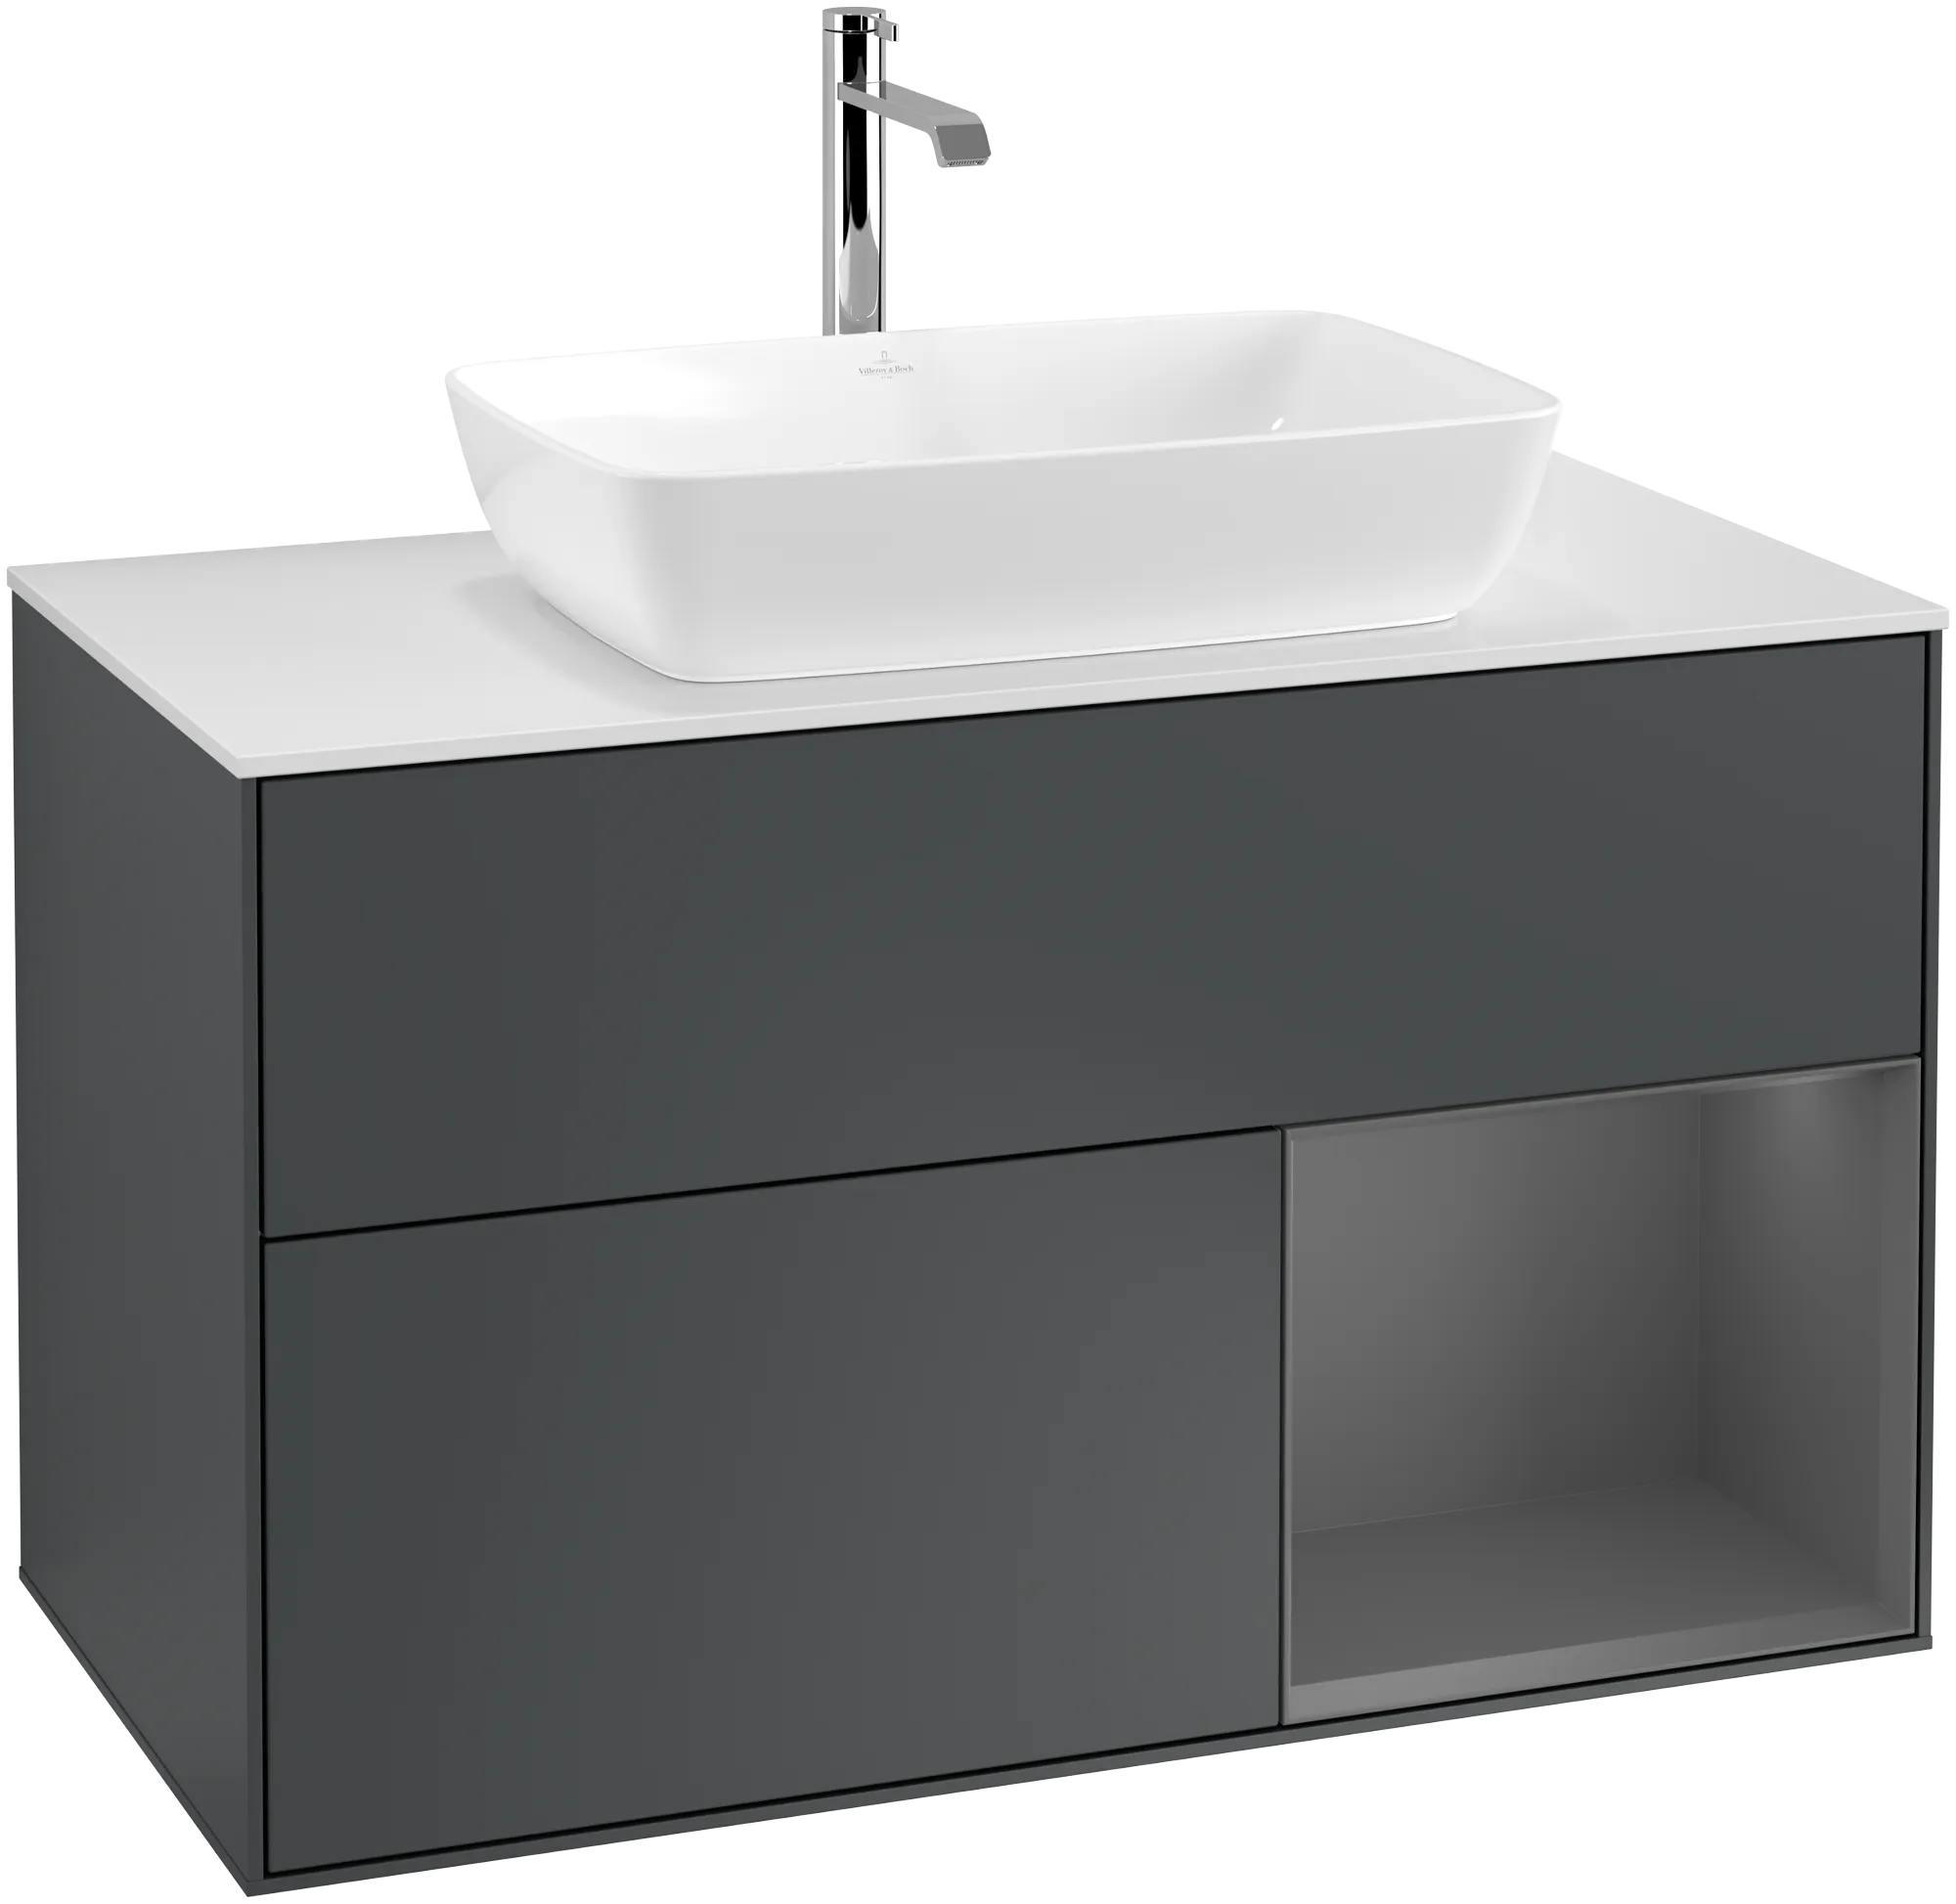 Obrázek VILLEROY BOCH Finion Vanity unit, with lighting, 2 pull-out compartments, 1000 x 603 x 501 mm, Midnight Blue Matt Lacquer / Anthracite Matt Lacquer / Glass White Matt #G781GKHG